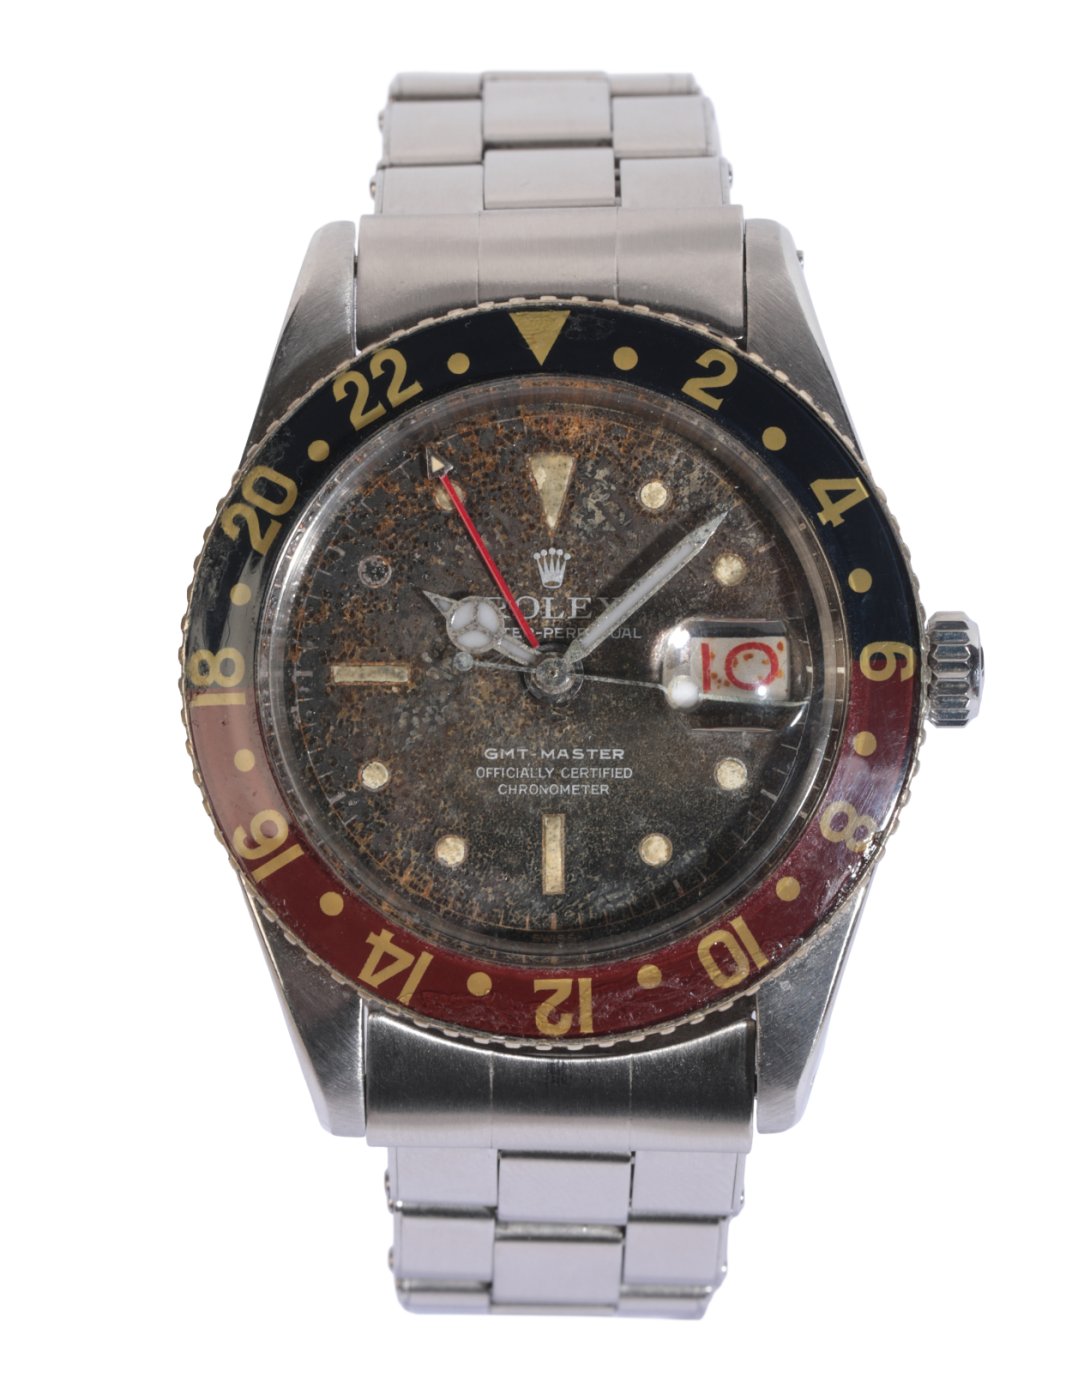 ROLEX GMT MASTER OYSTER PERPETUAL "PUSSY GALORE": A GENTLEMAN'S STAINLESS STEEL BRACELET WATCH - Image 2 of 9